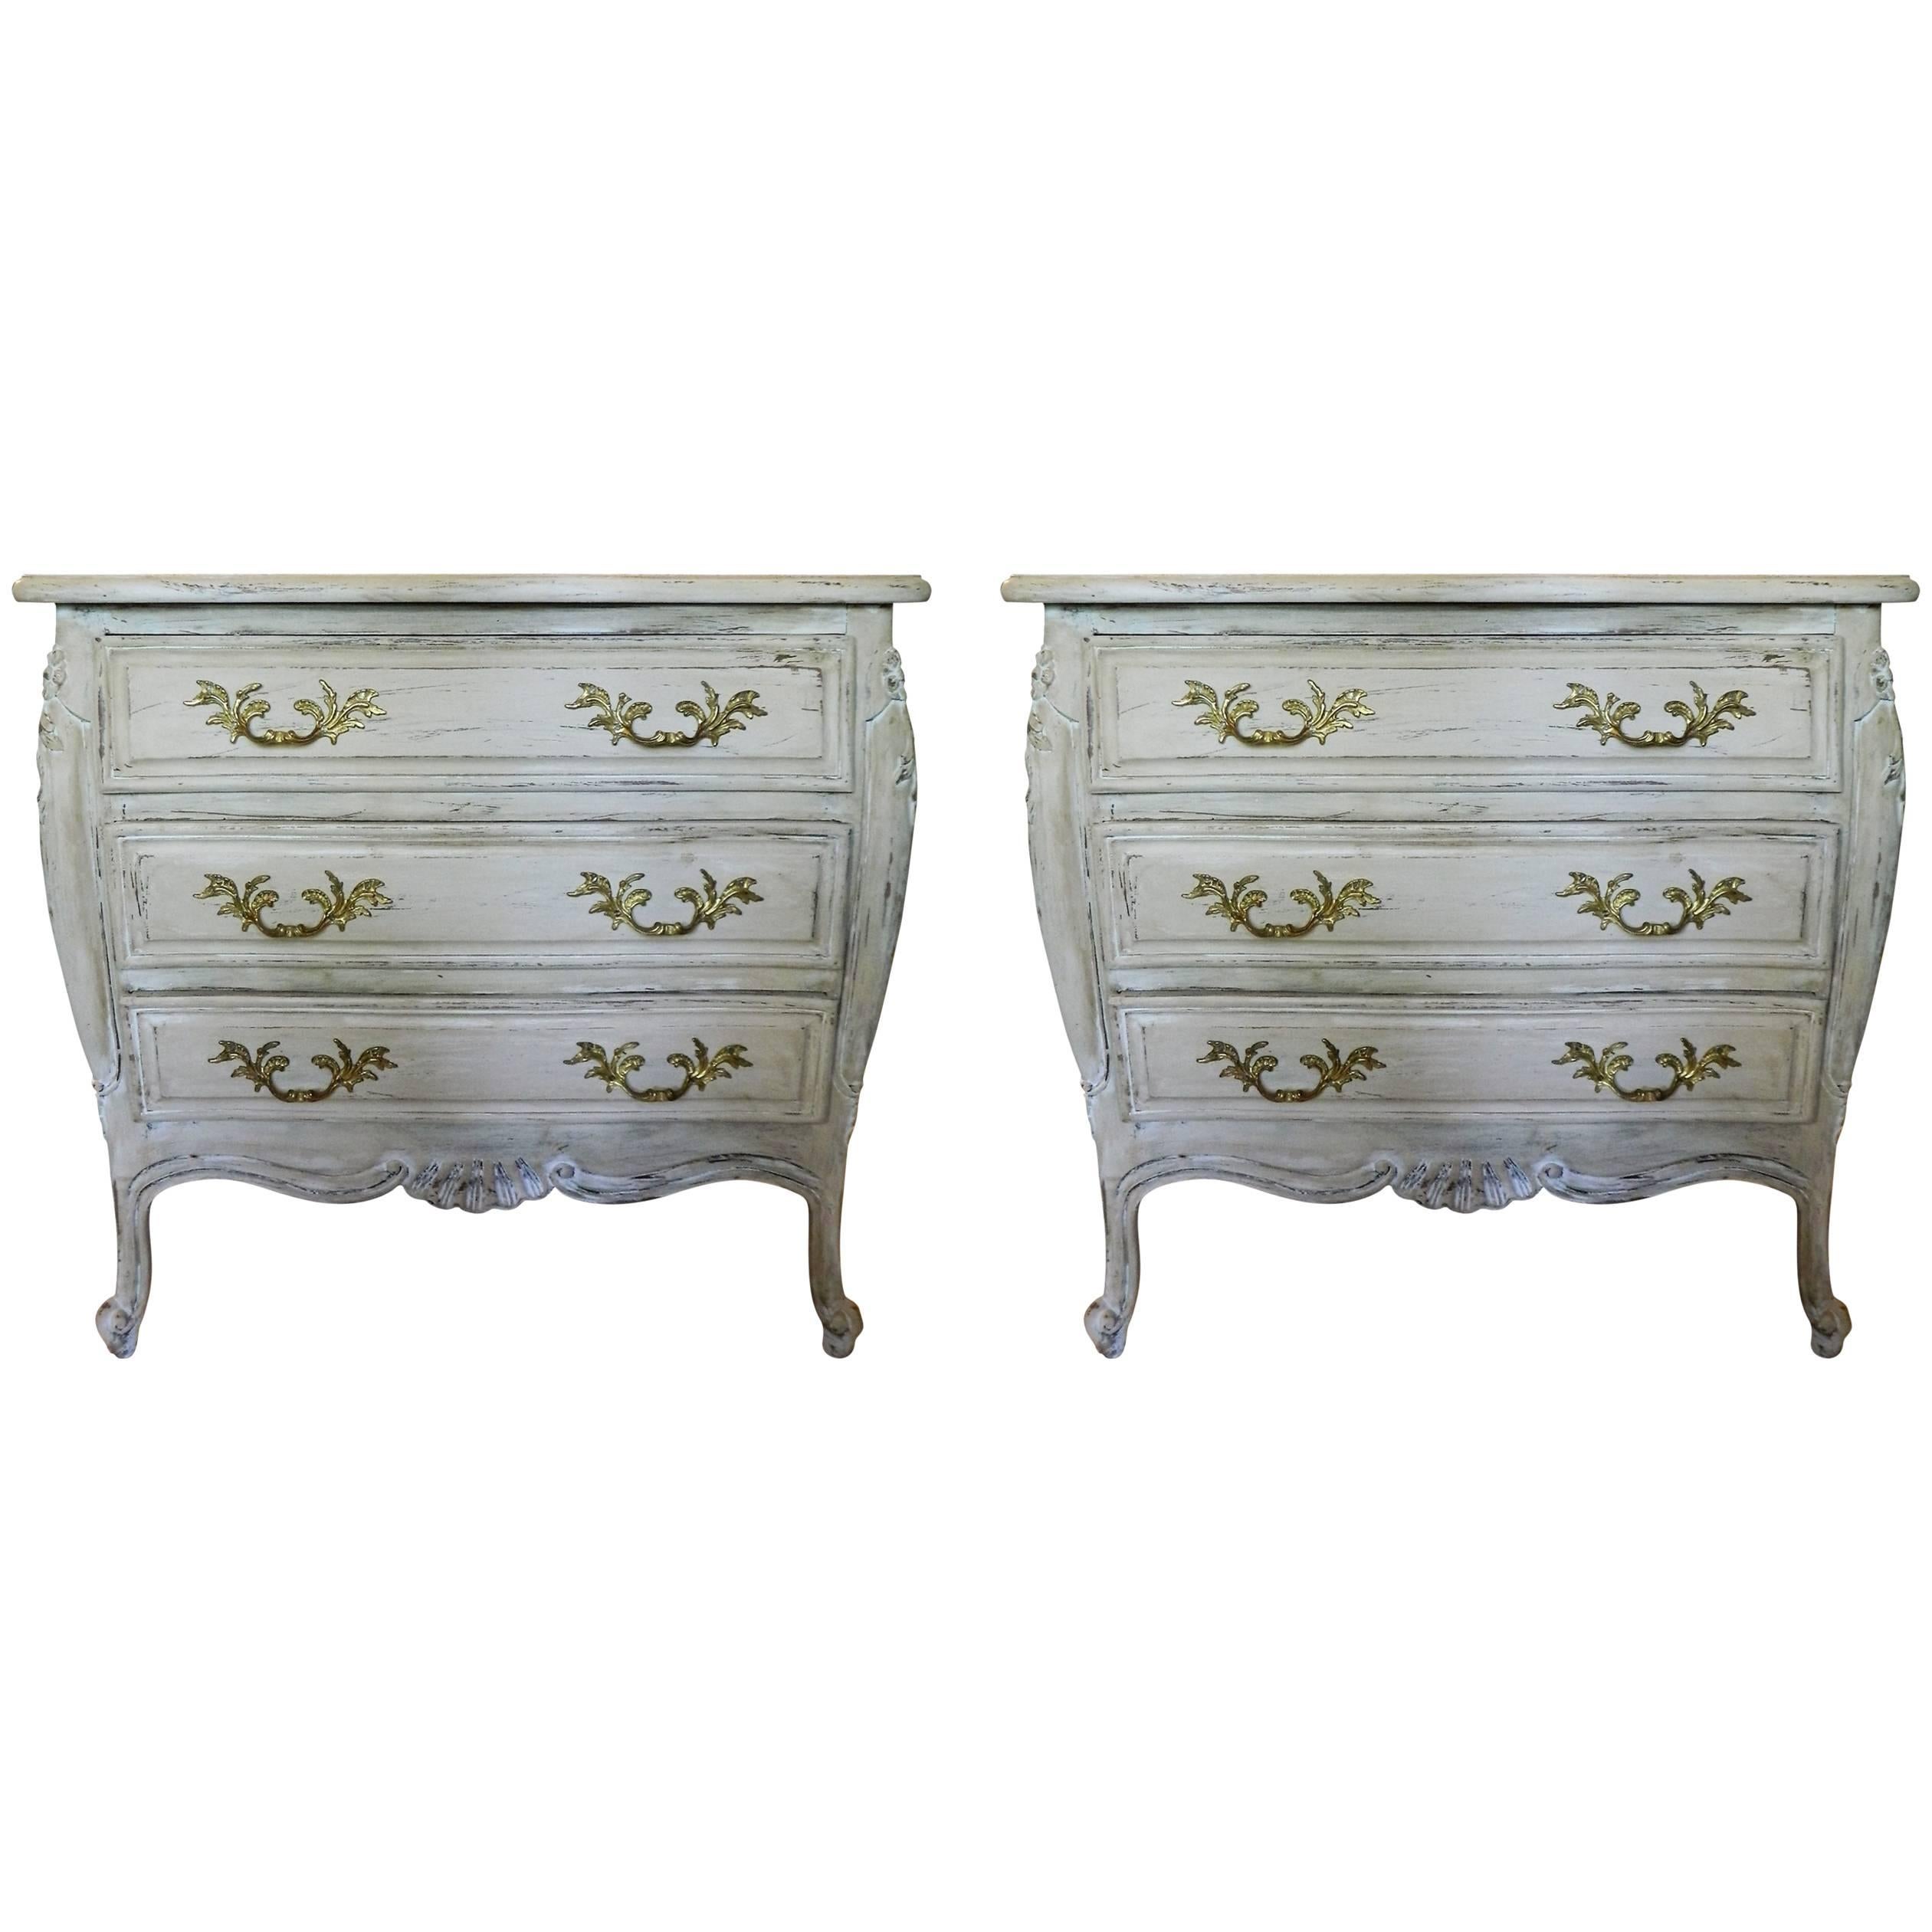 Pair of French Style Painted and Carved Bed Side Chest of Drawers, 20th Century